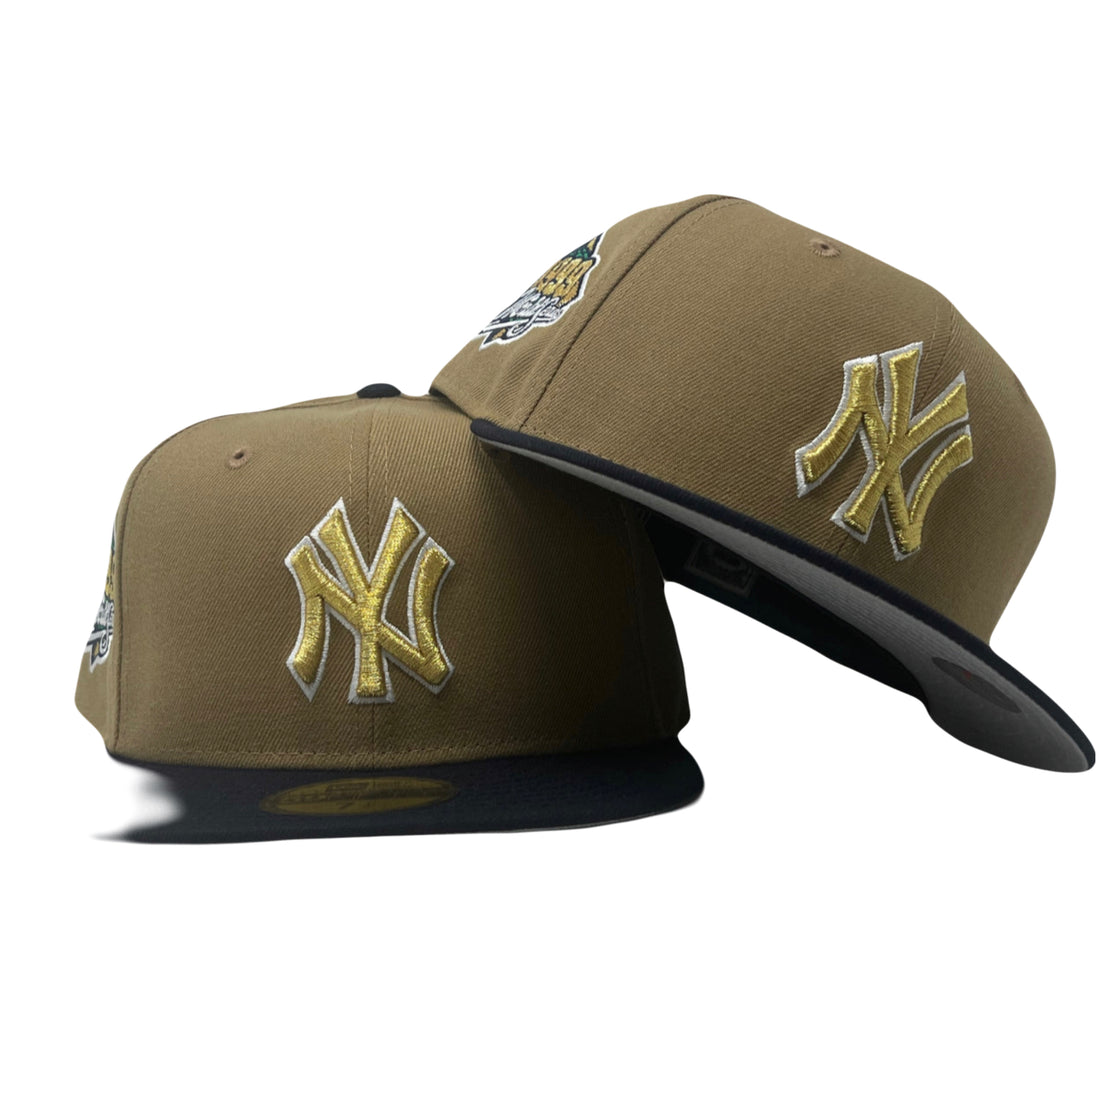 New York Yankees 1999 World Series Camel/ Navy 5950 New Era Fitted Hat